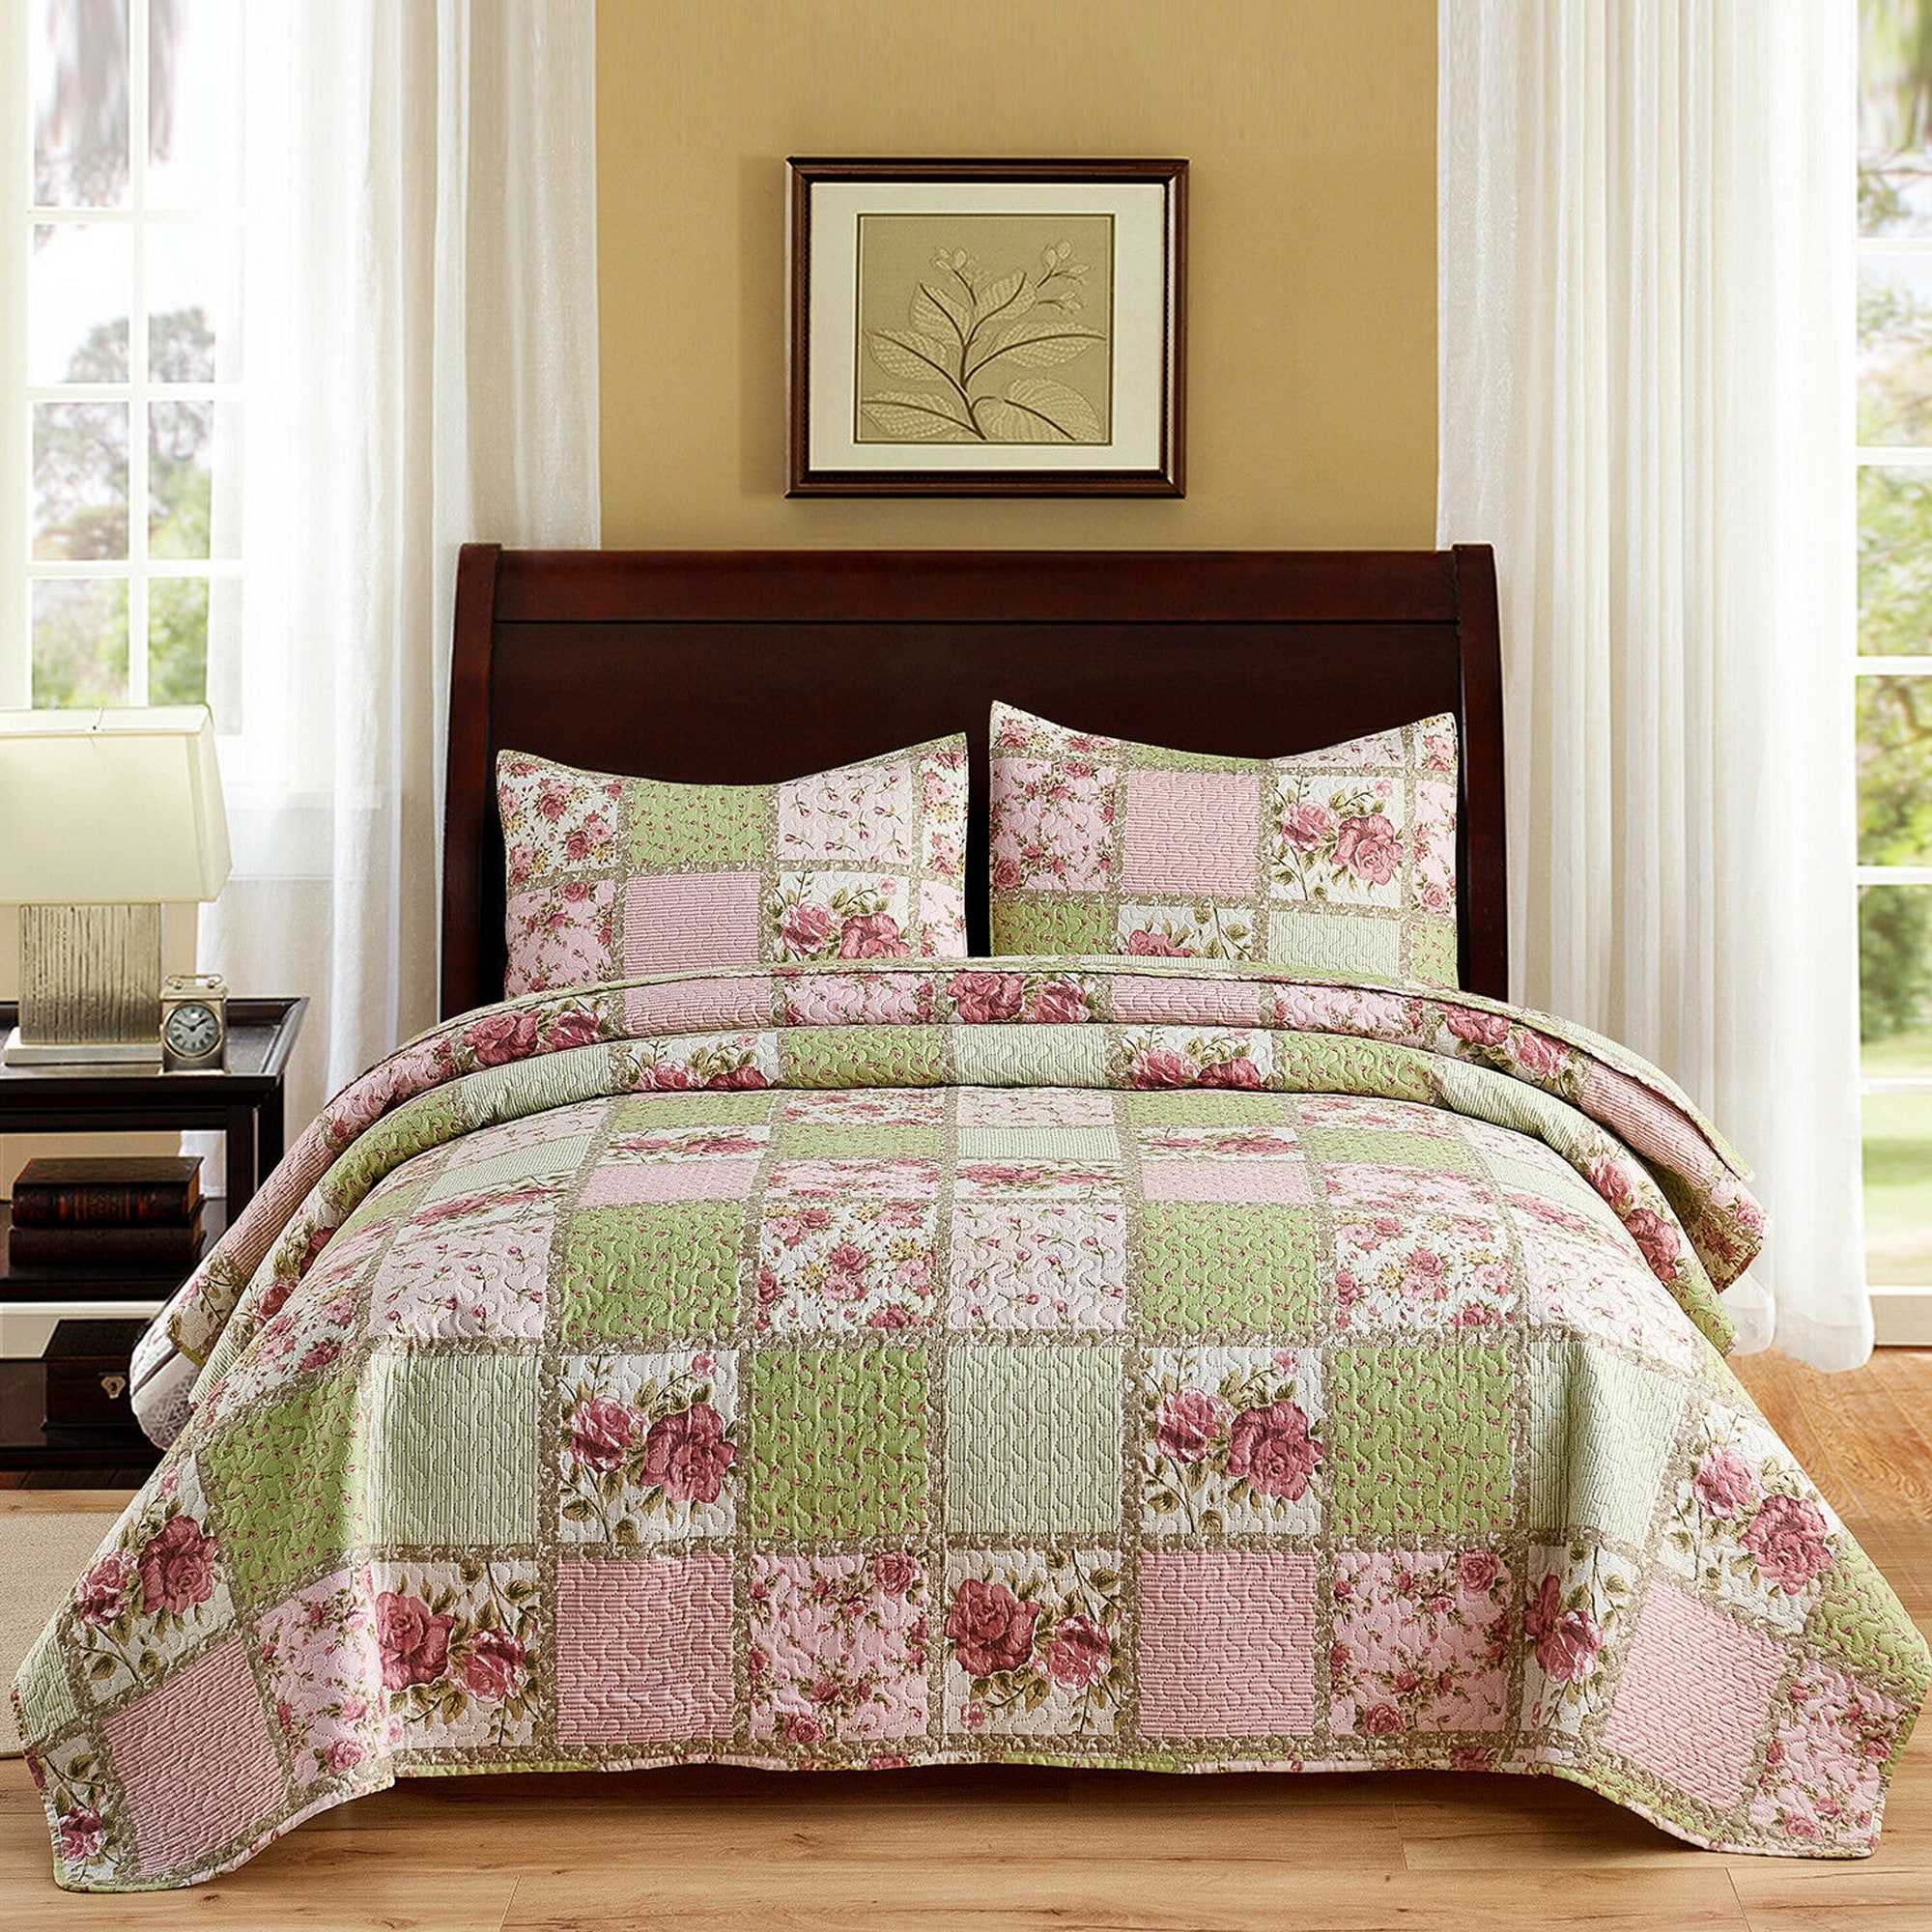 3 Piece Patchwork Quilted Bedspread King Size Pink Bed Throw With Pillow Cases 